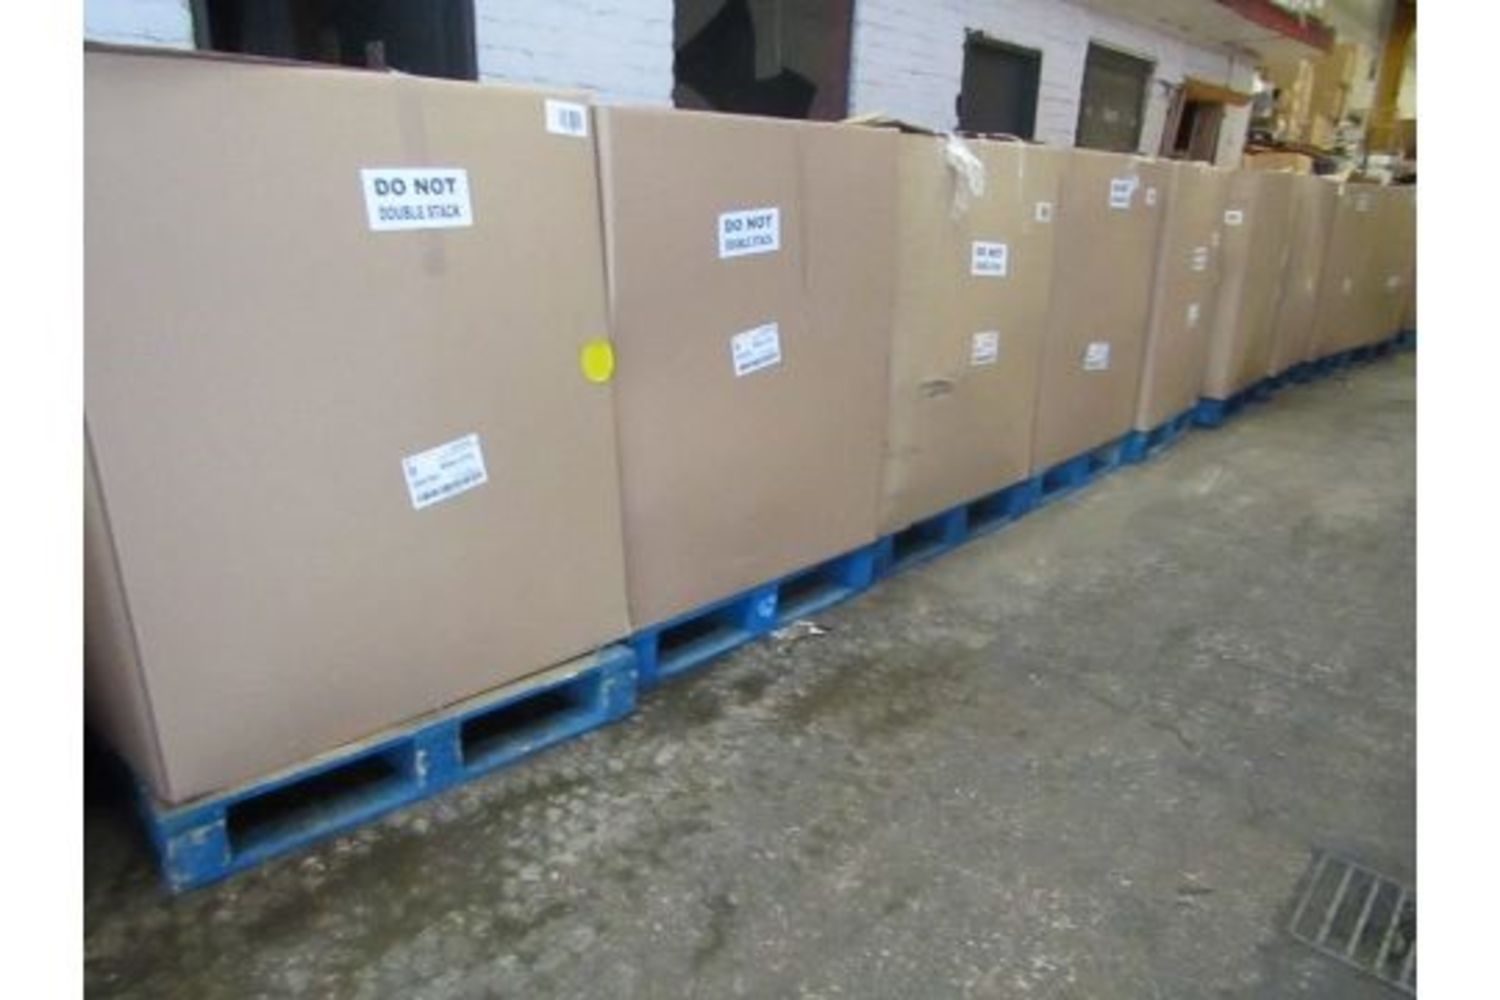 Pallets of raw returns from a Large Online and Telesales retailer